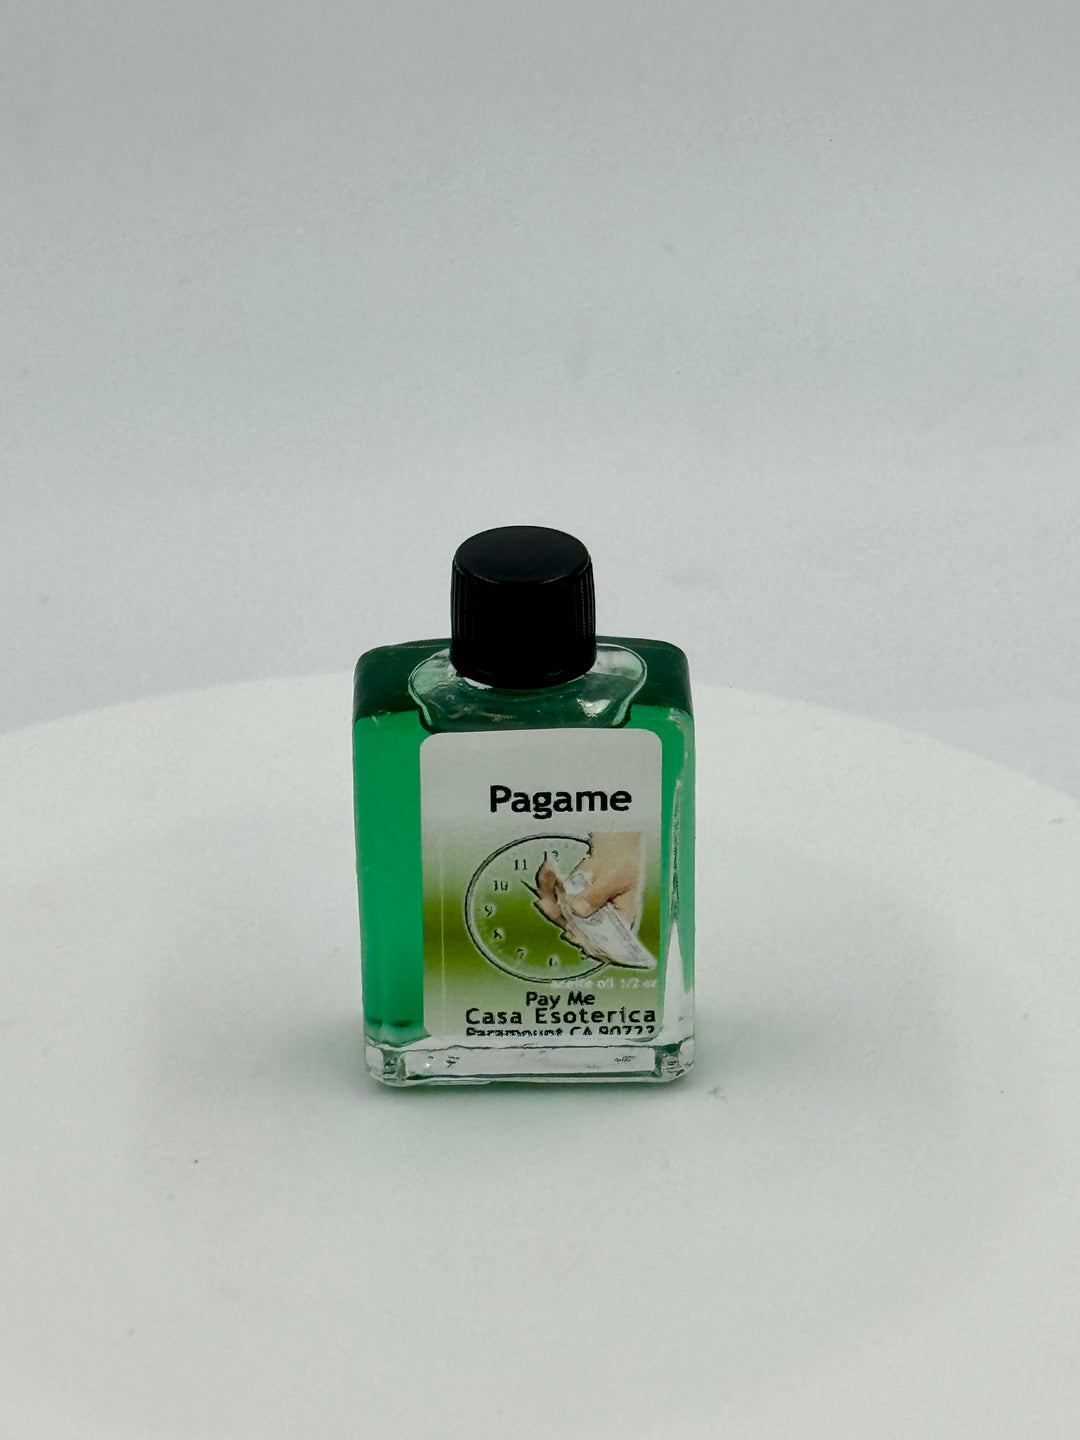 PAY ME (PAGAME) -Oil/Aceite